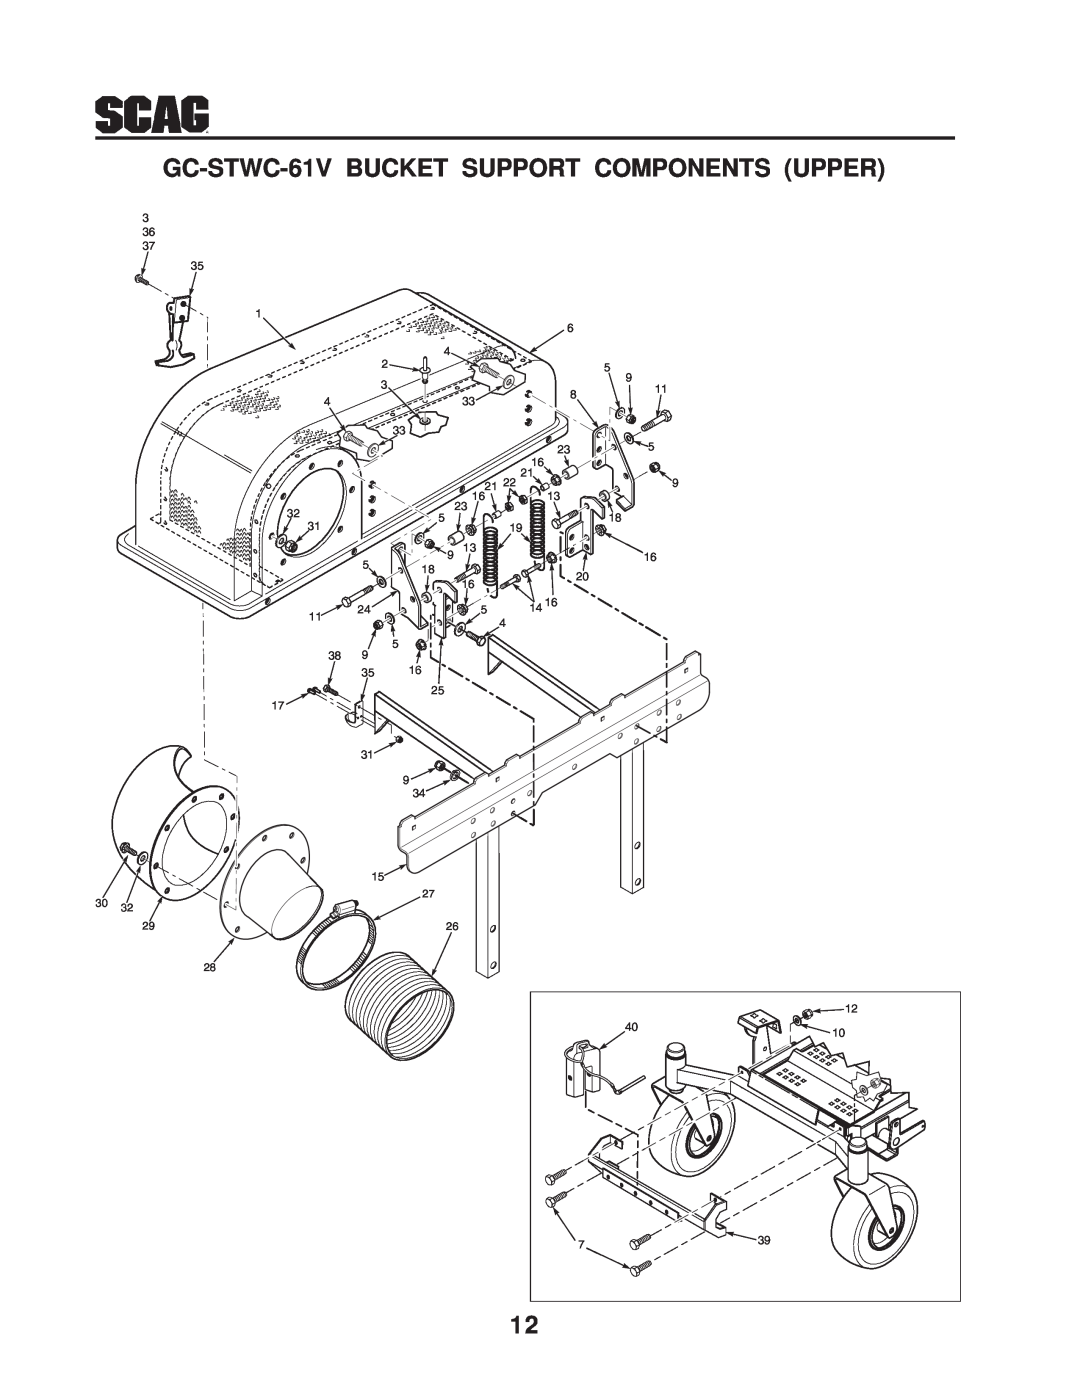 Scag Power Equipment operating instructions GC-STWC-61V BUCKET SUPPORT COMPONENTS UPPER 